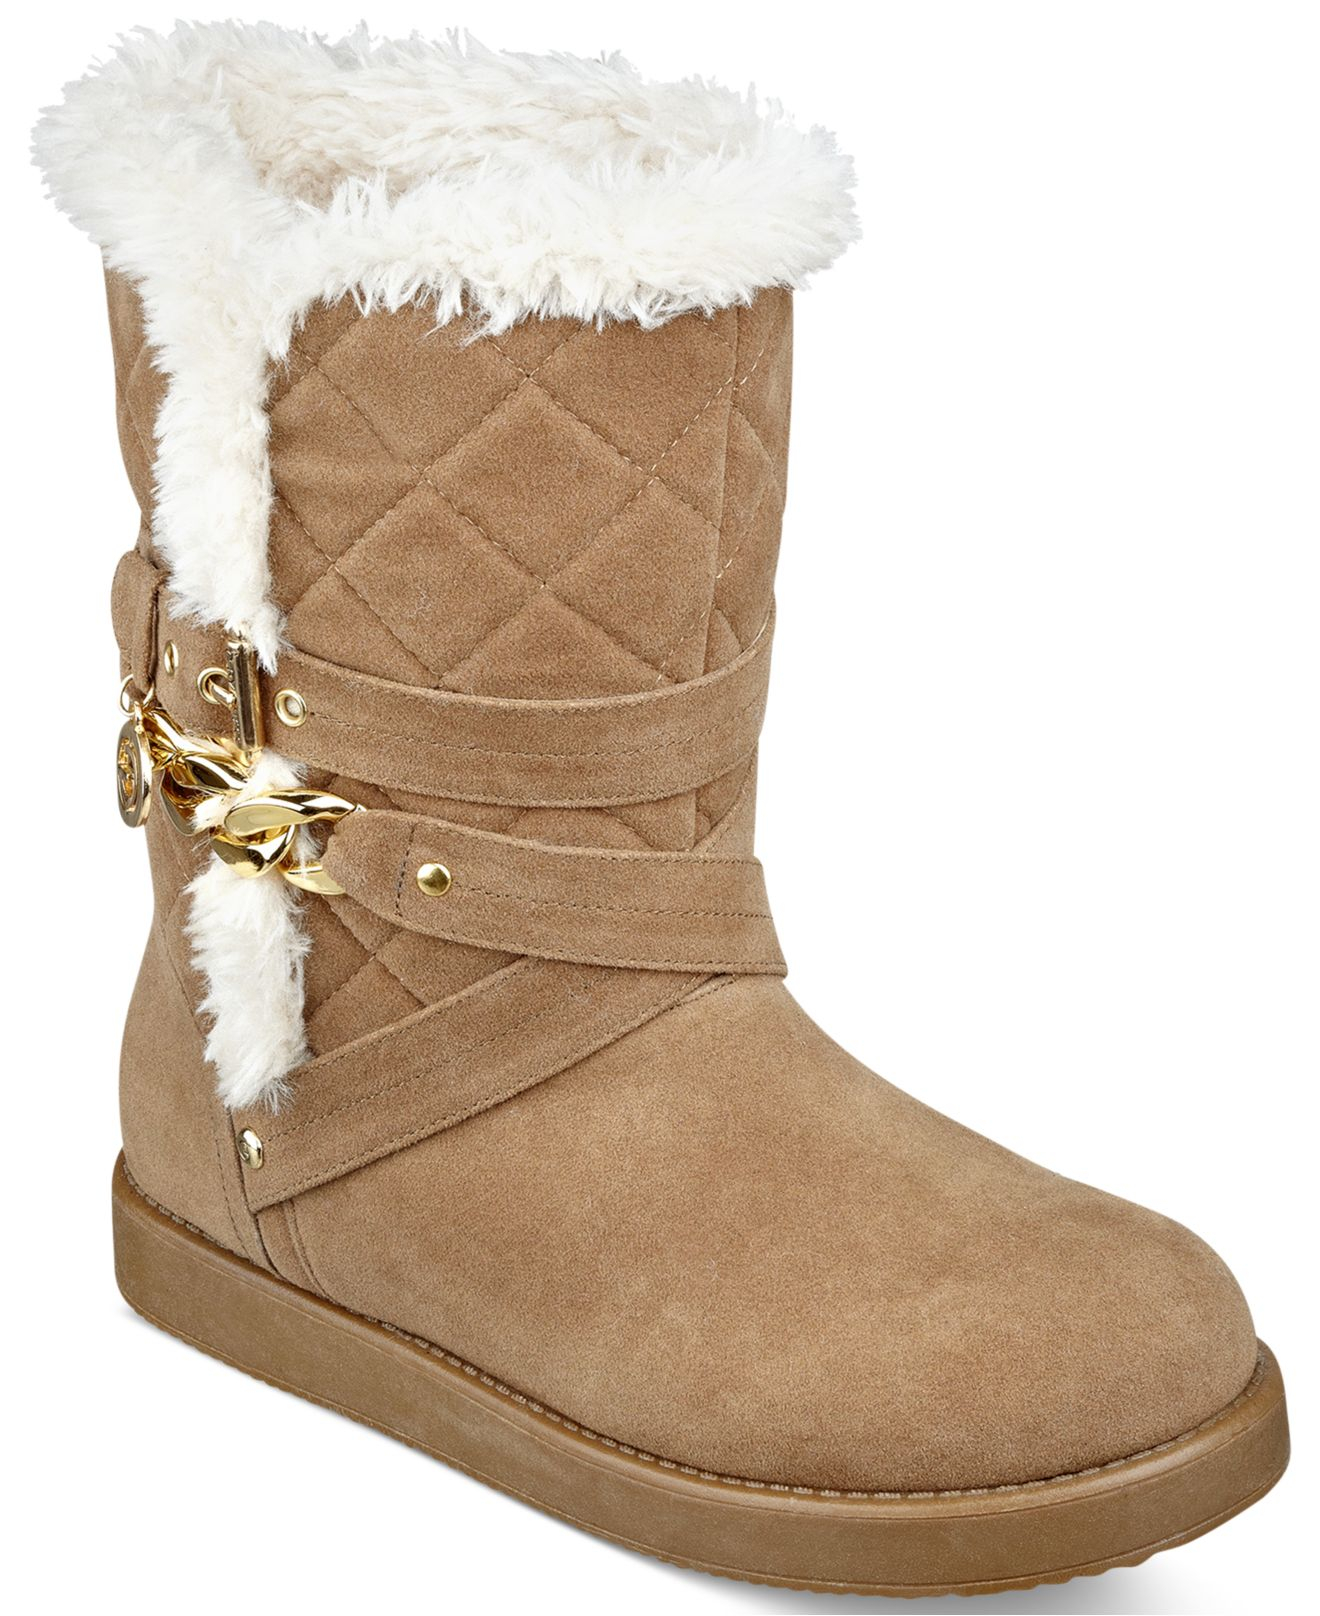 Lyst - G By Guess Women'S Angelah Quilted Faux-Fur Booties in Natural1320 x 1616